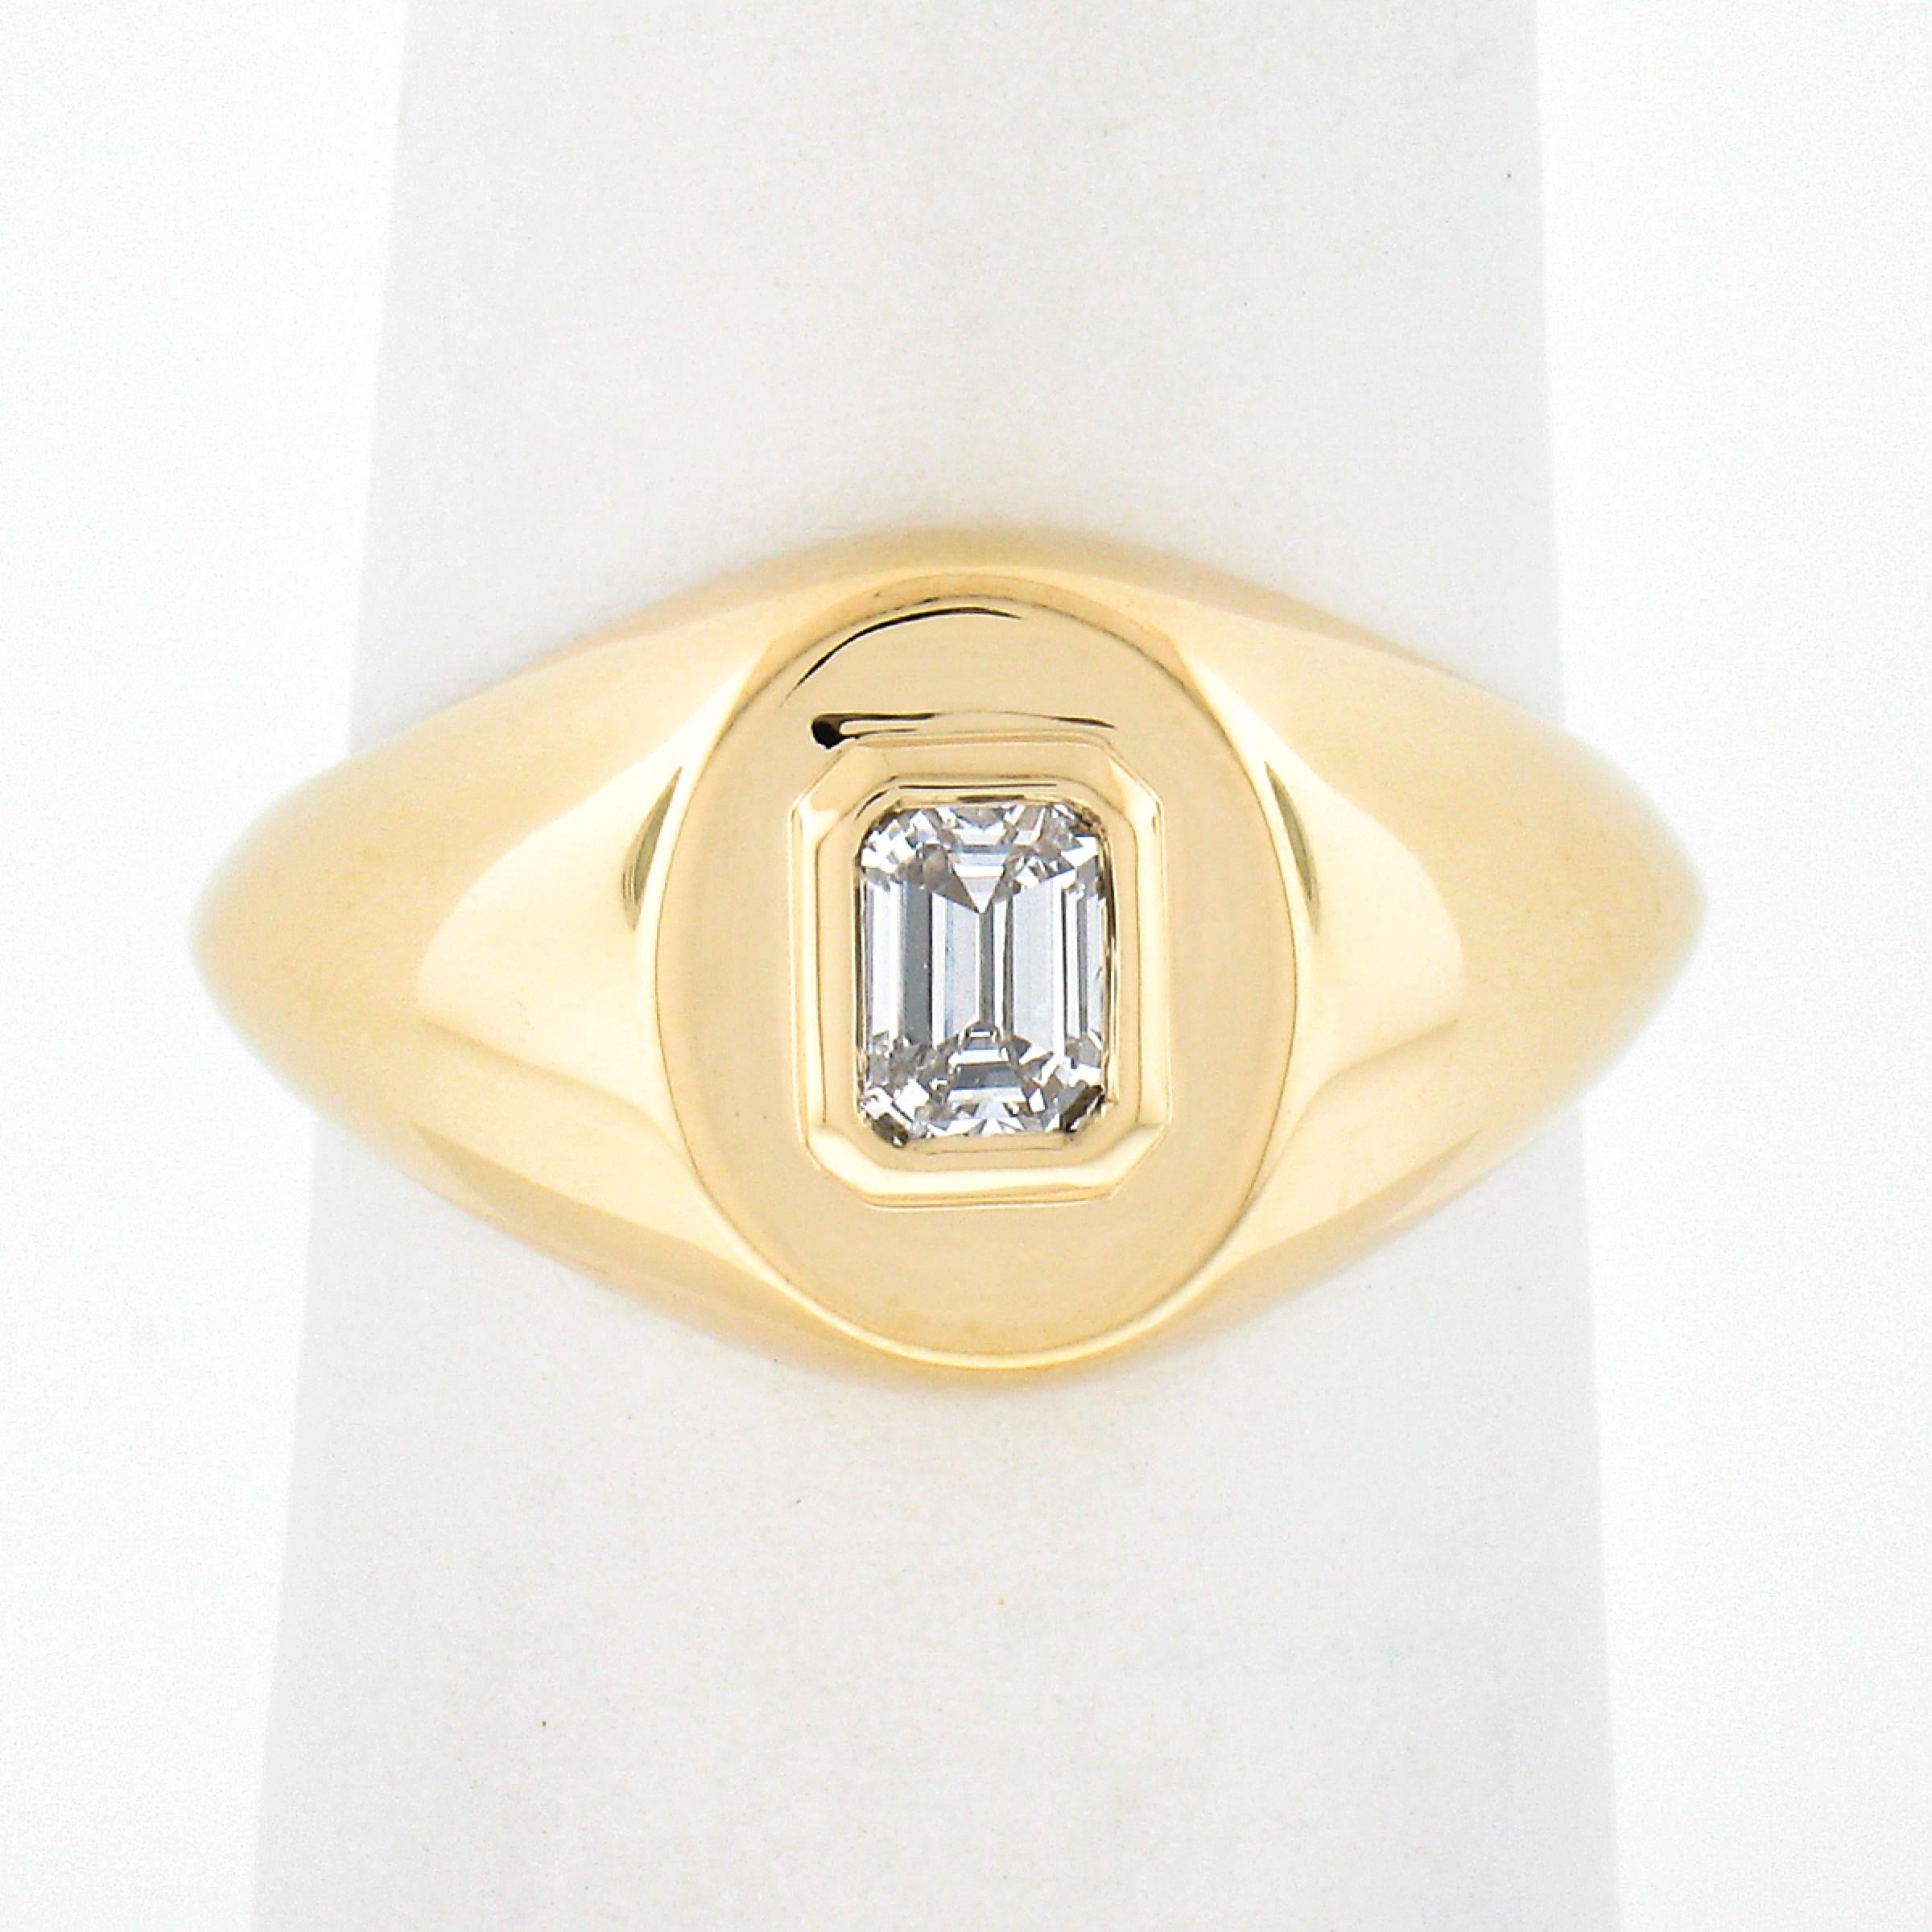 Here we have a simple yet absolutely gorgeous diamond solitaire ring that is newly crafted from solid 14k yellow gold. The solitaire has a beautiful emerald cut and is neatly bezel set at the slightly raised center of the ring, weighing exactly 0.40